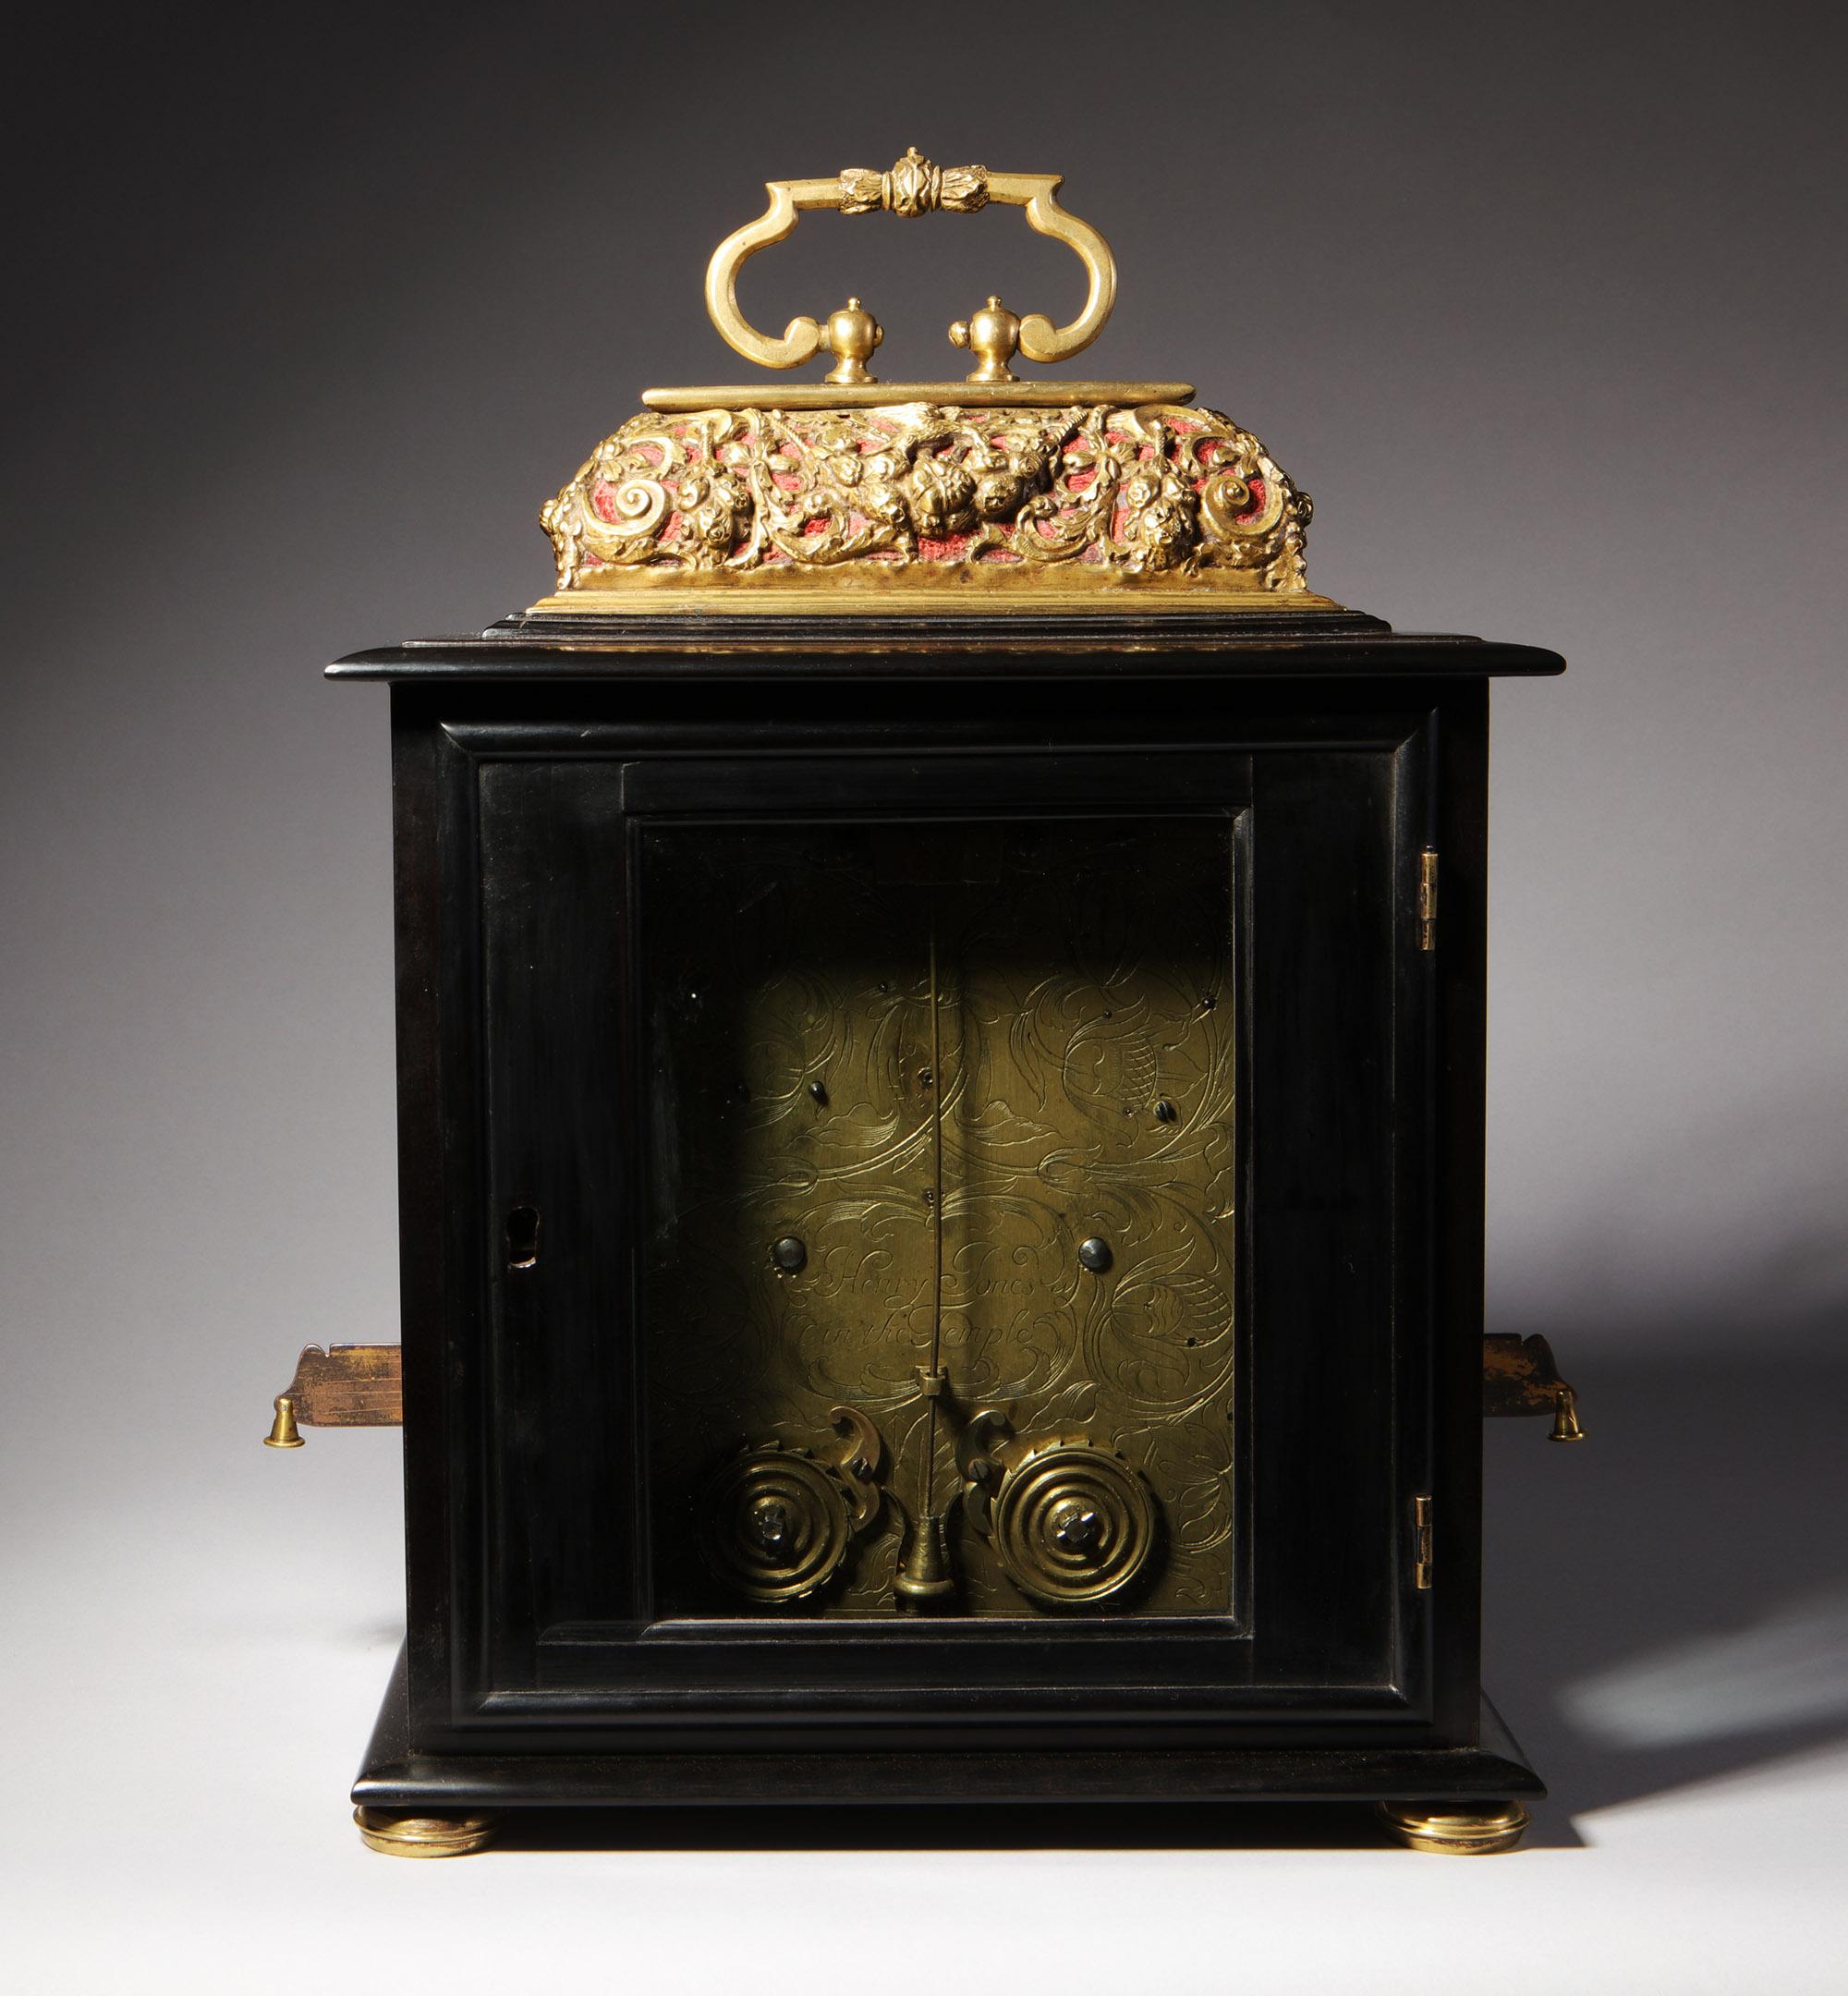 A Rare and Important Charles II 17th Century Table Clock by Henry Jones 6